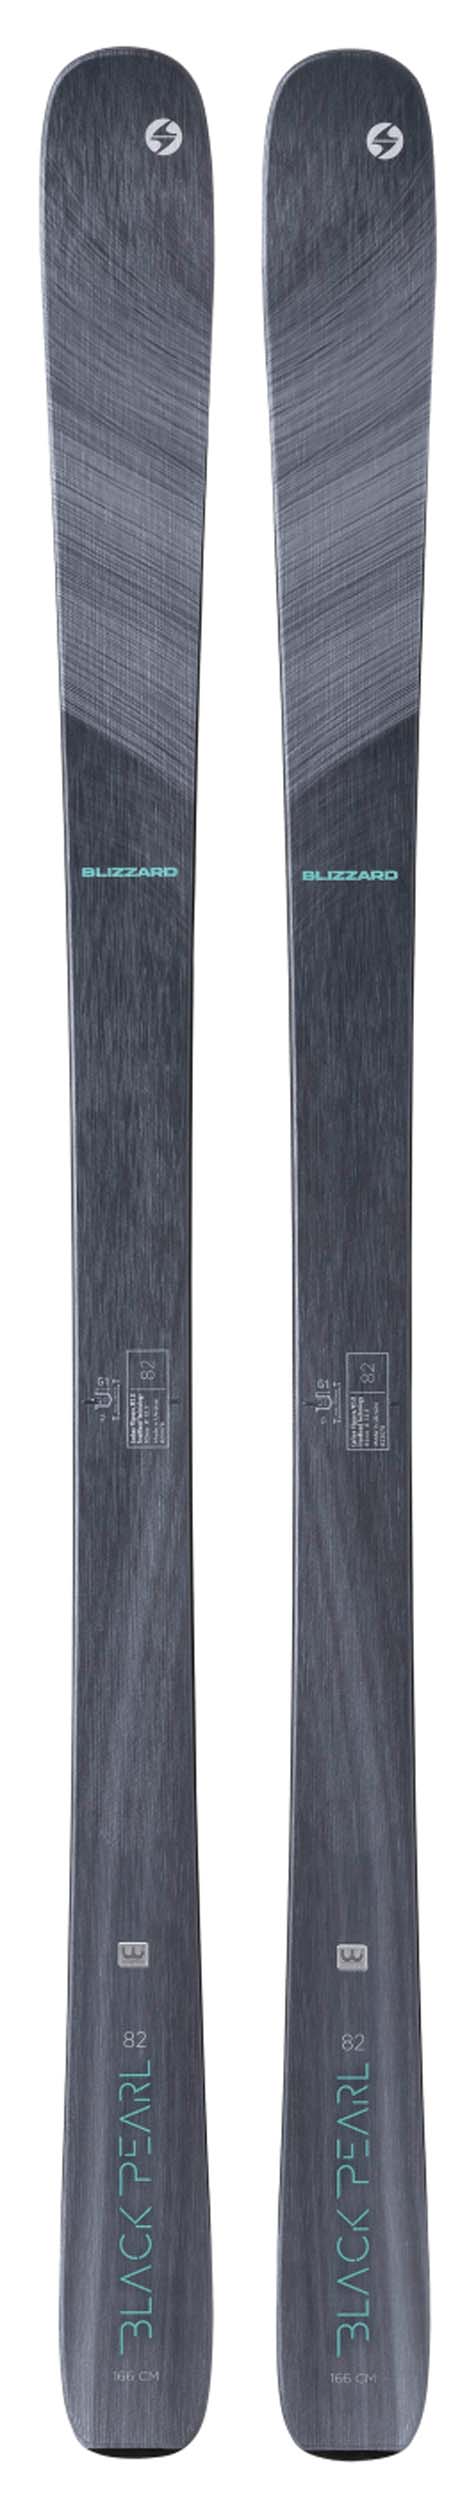 Blizzard 2022 Black Pearl 82 (Gray) Skis (Without Bindings / Flat) NEW !! 166cm